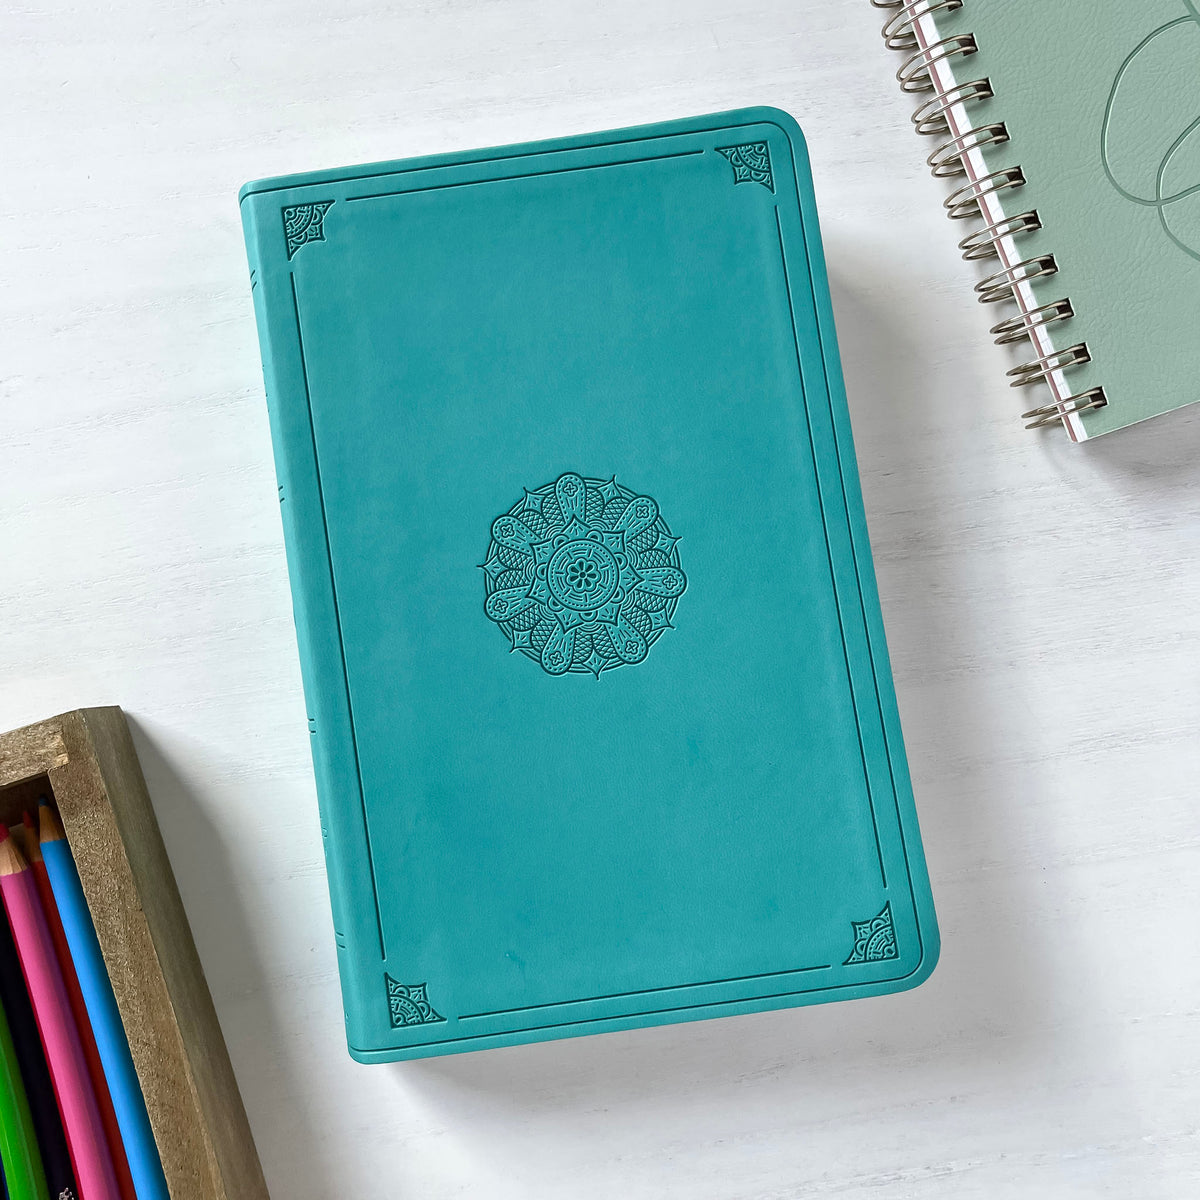 ESV Thinline Teal Cover